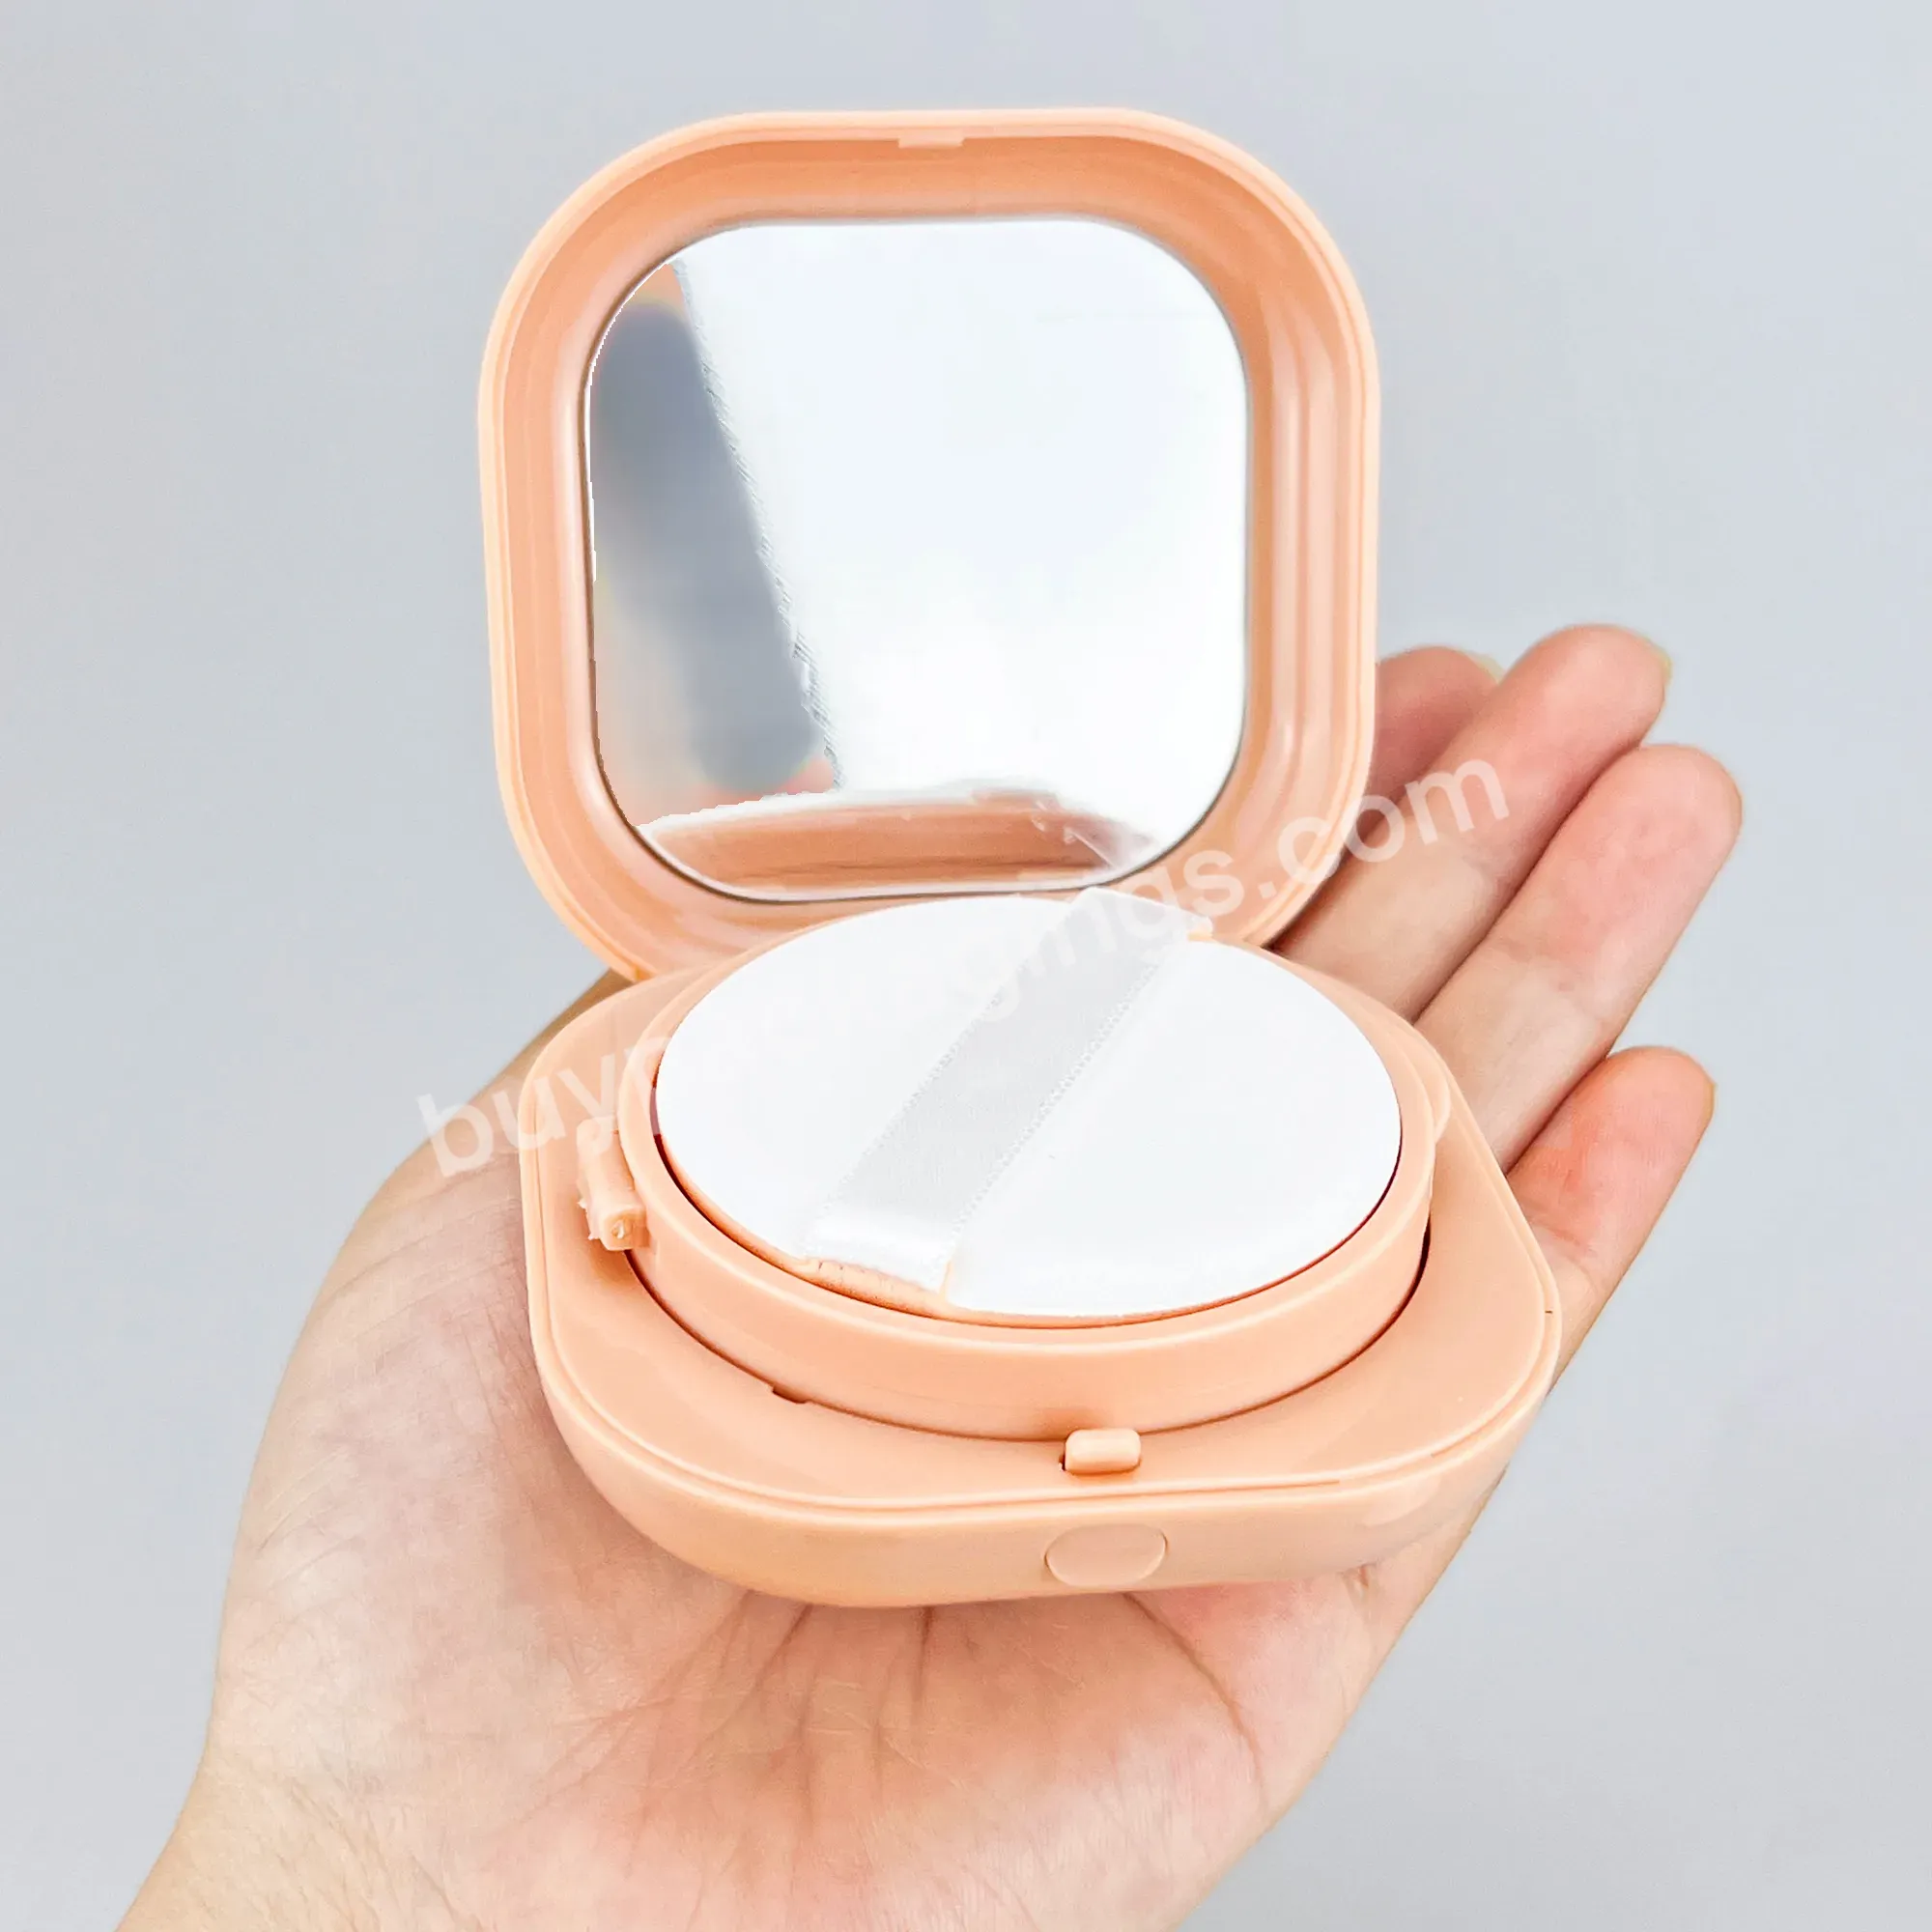 Orange 15g Wholesale Cosmetic Makeup Empty Reusable Foundation Container Packaging Round Air Cushion Bb Cc Cream Compact Case - Buy 15g Empty Air Cushion Powder Case Compact Powder Case Cushion Foundation Case Face Powder Container Pressed Powder Con